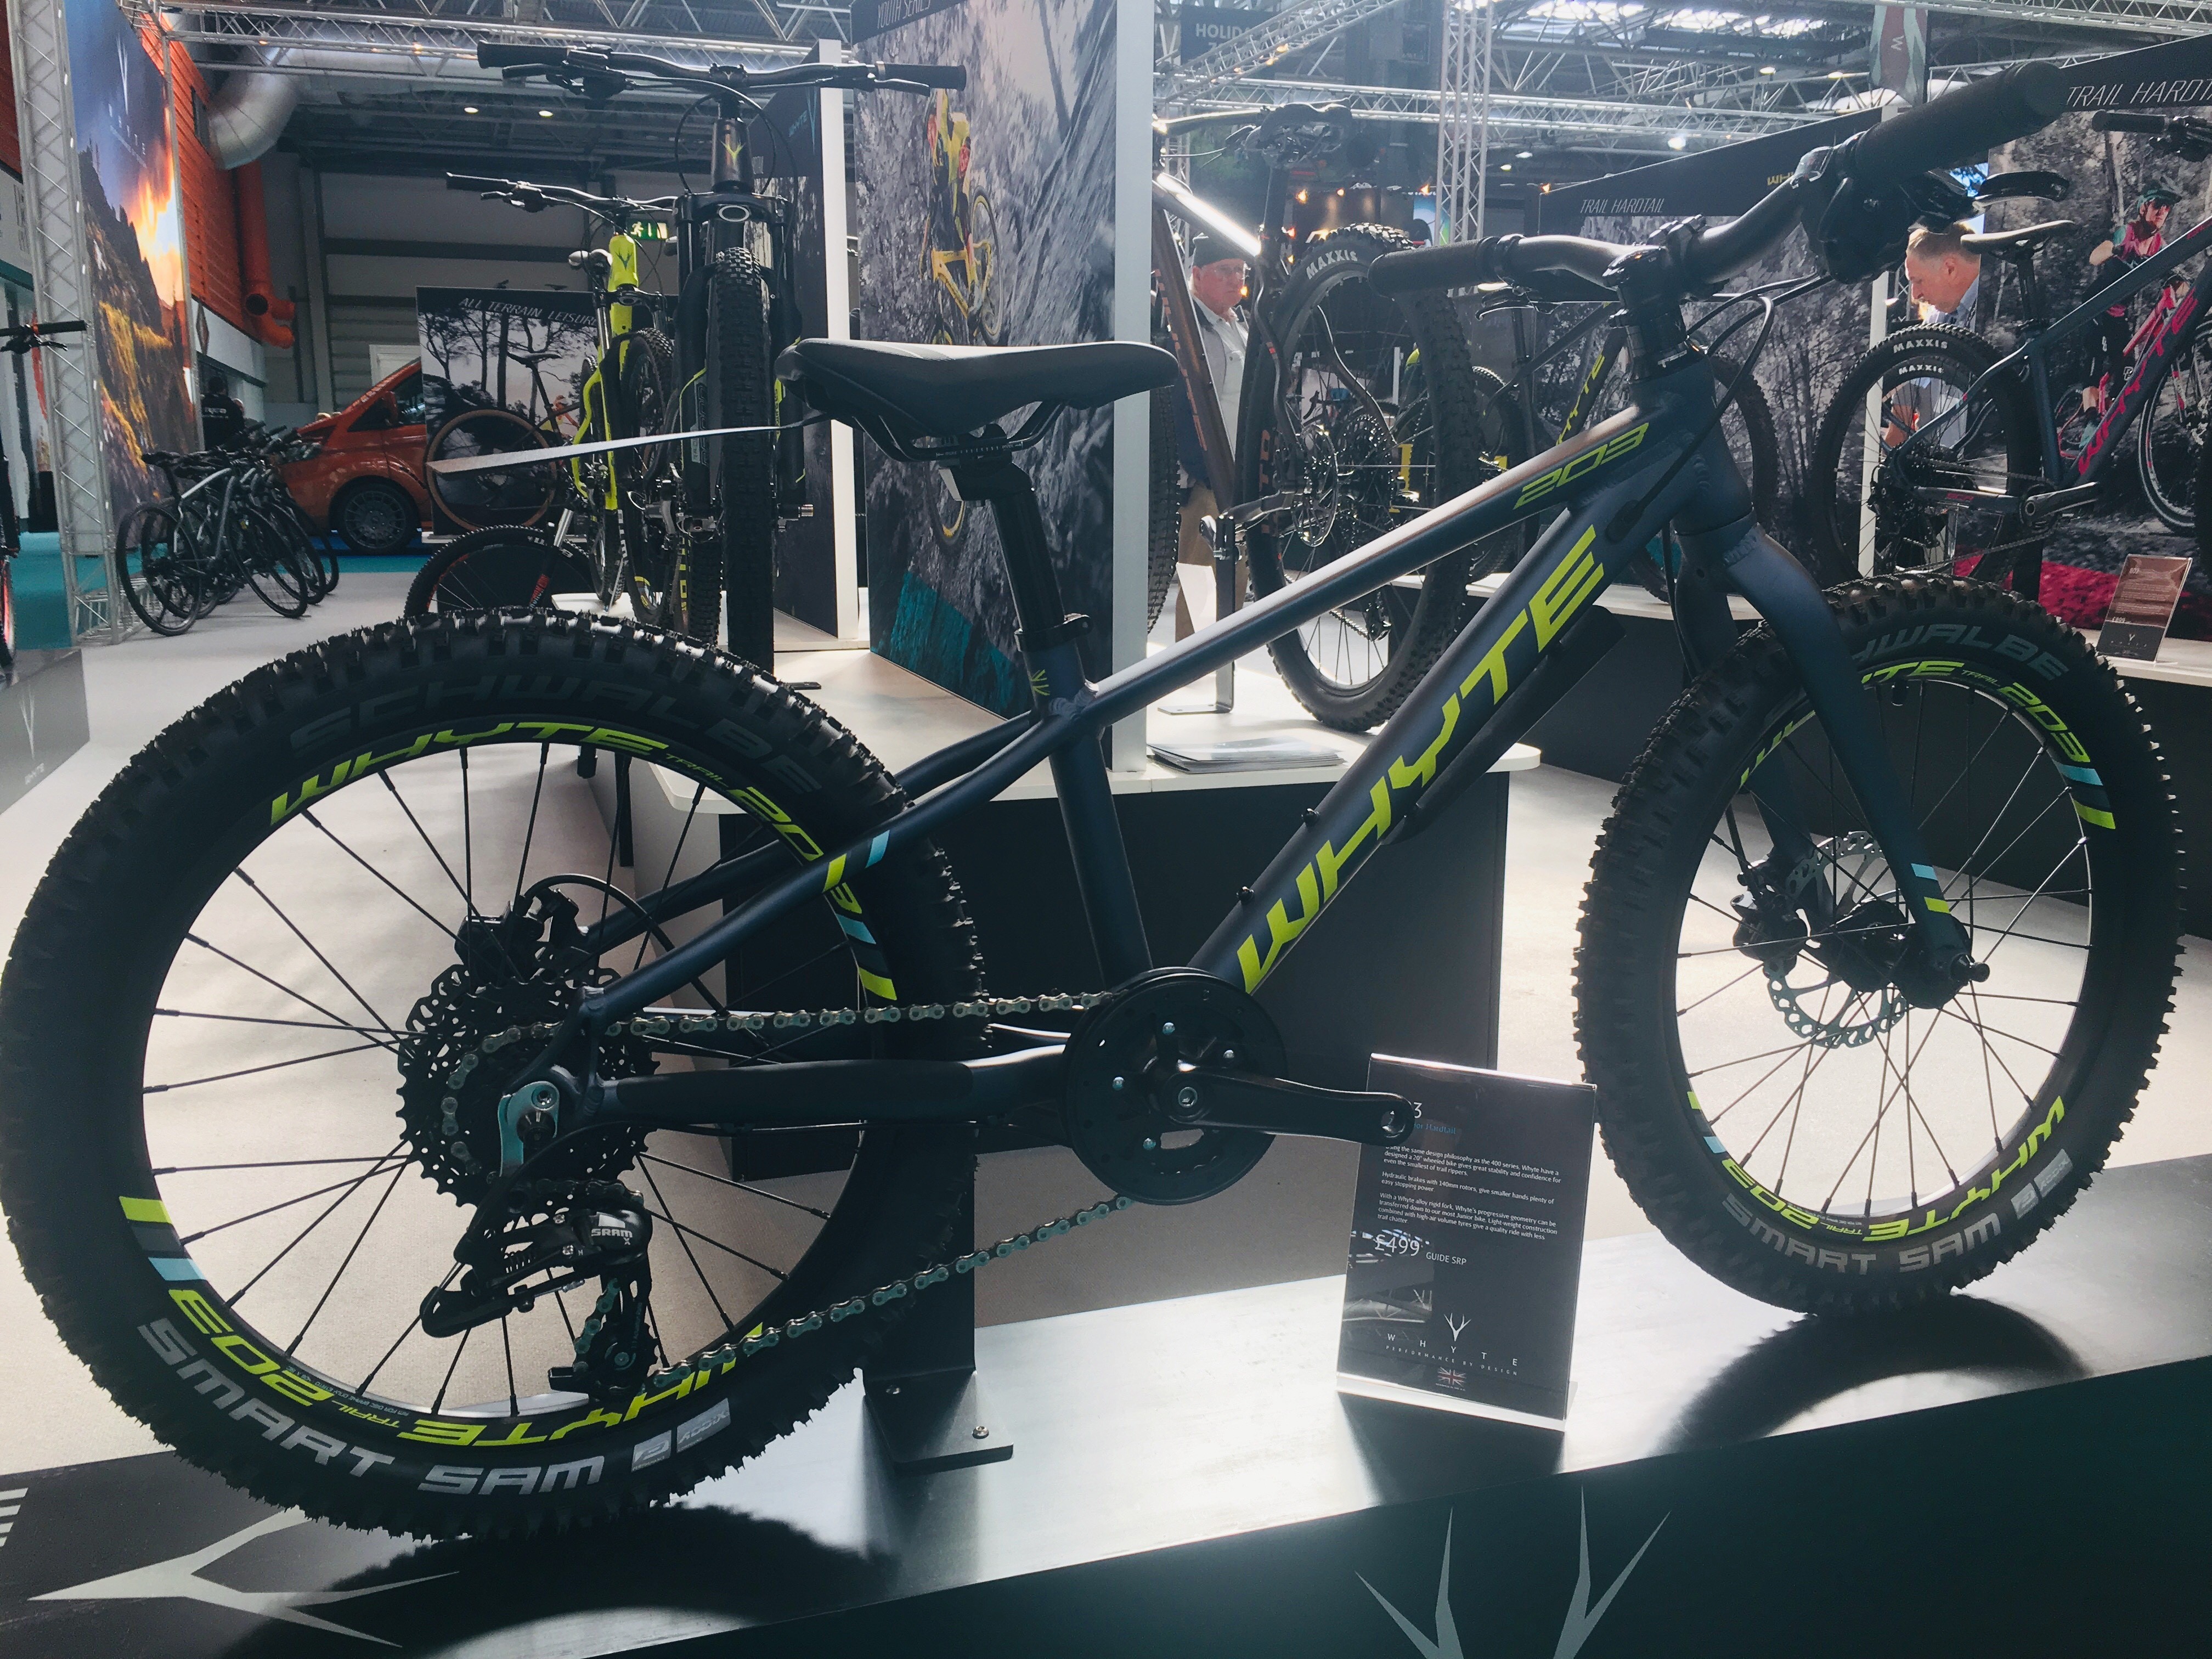 The Cycle Show 2018: What's new?